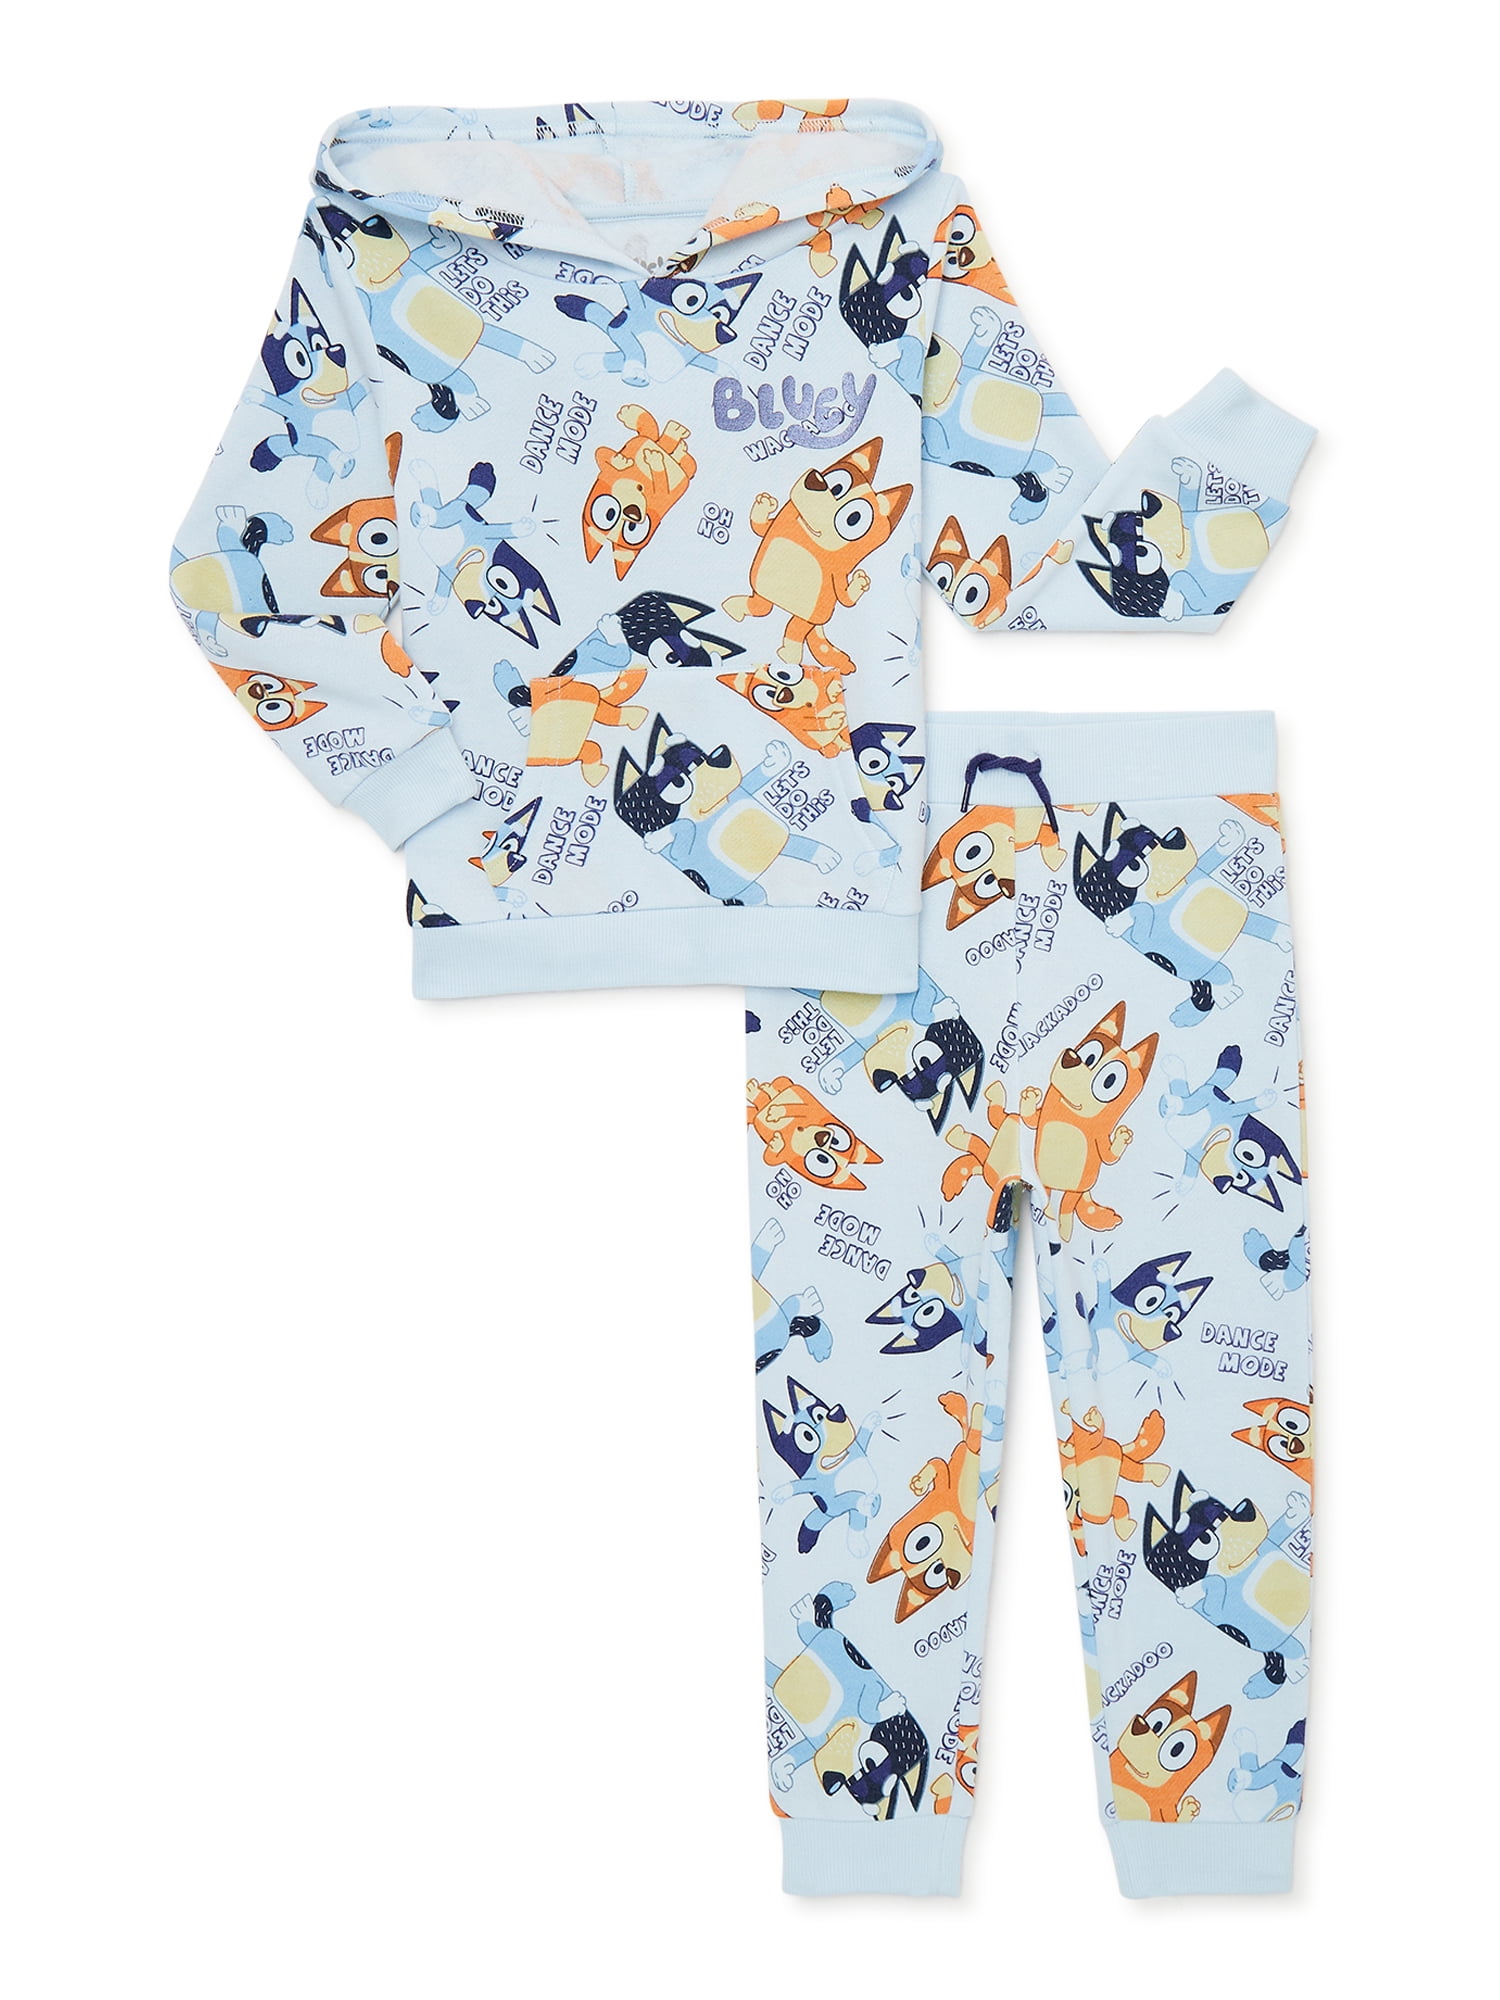 Bluey Baby and Toddler Boys Fleece Hoodie and Joggers, 2-Piece Outfit Set, Sizes 12M-5T